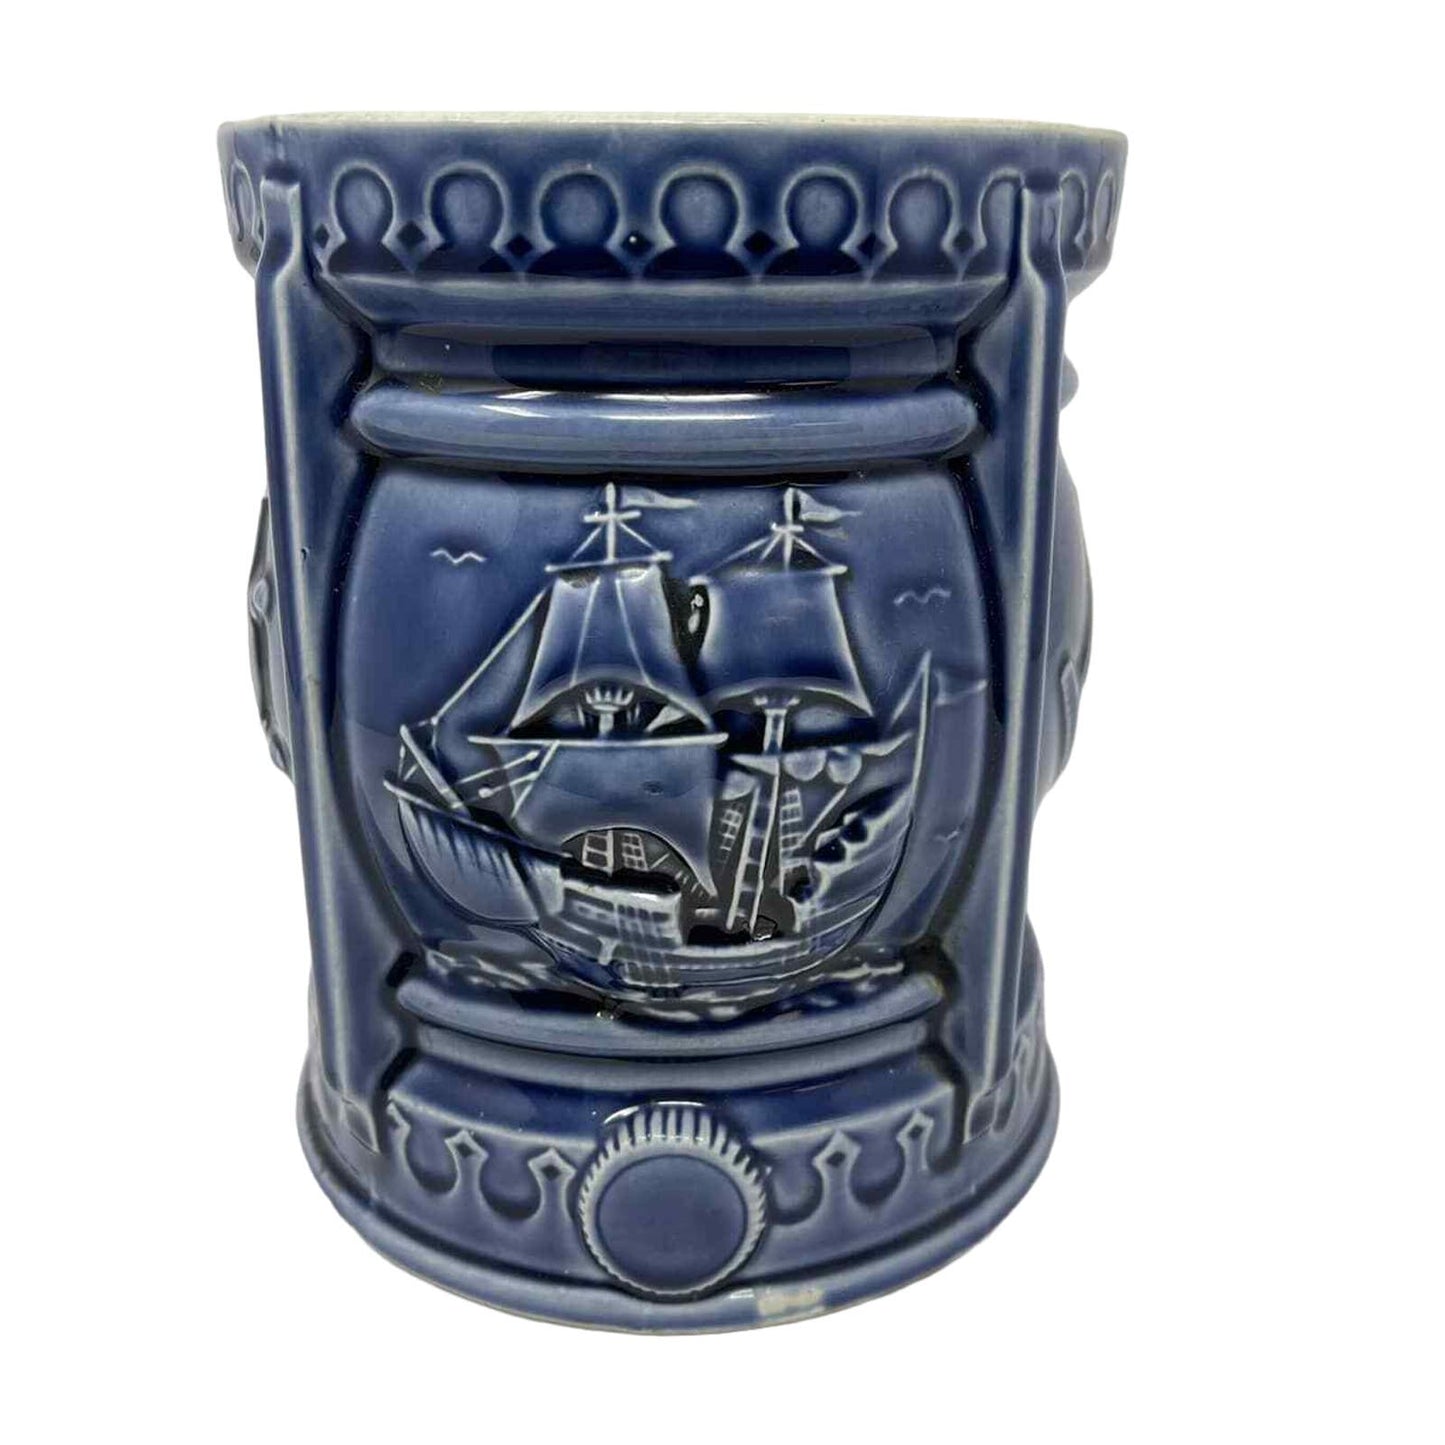 Nautical Cachepot with Mariners Compass MCM Japan